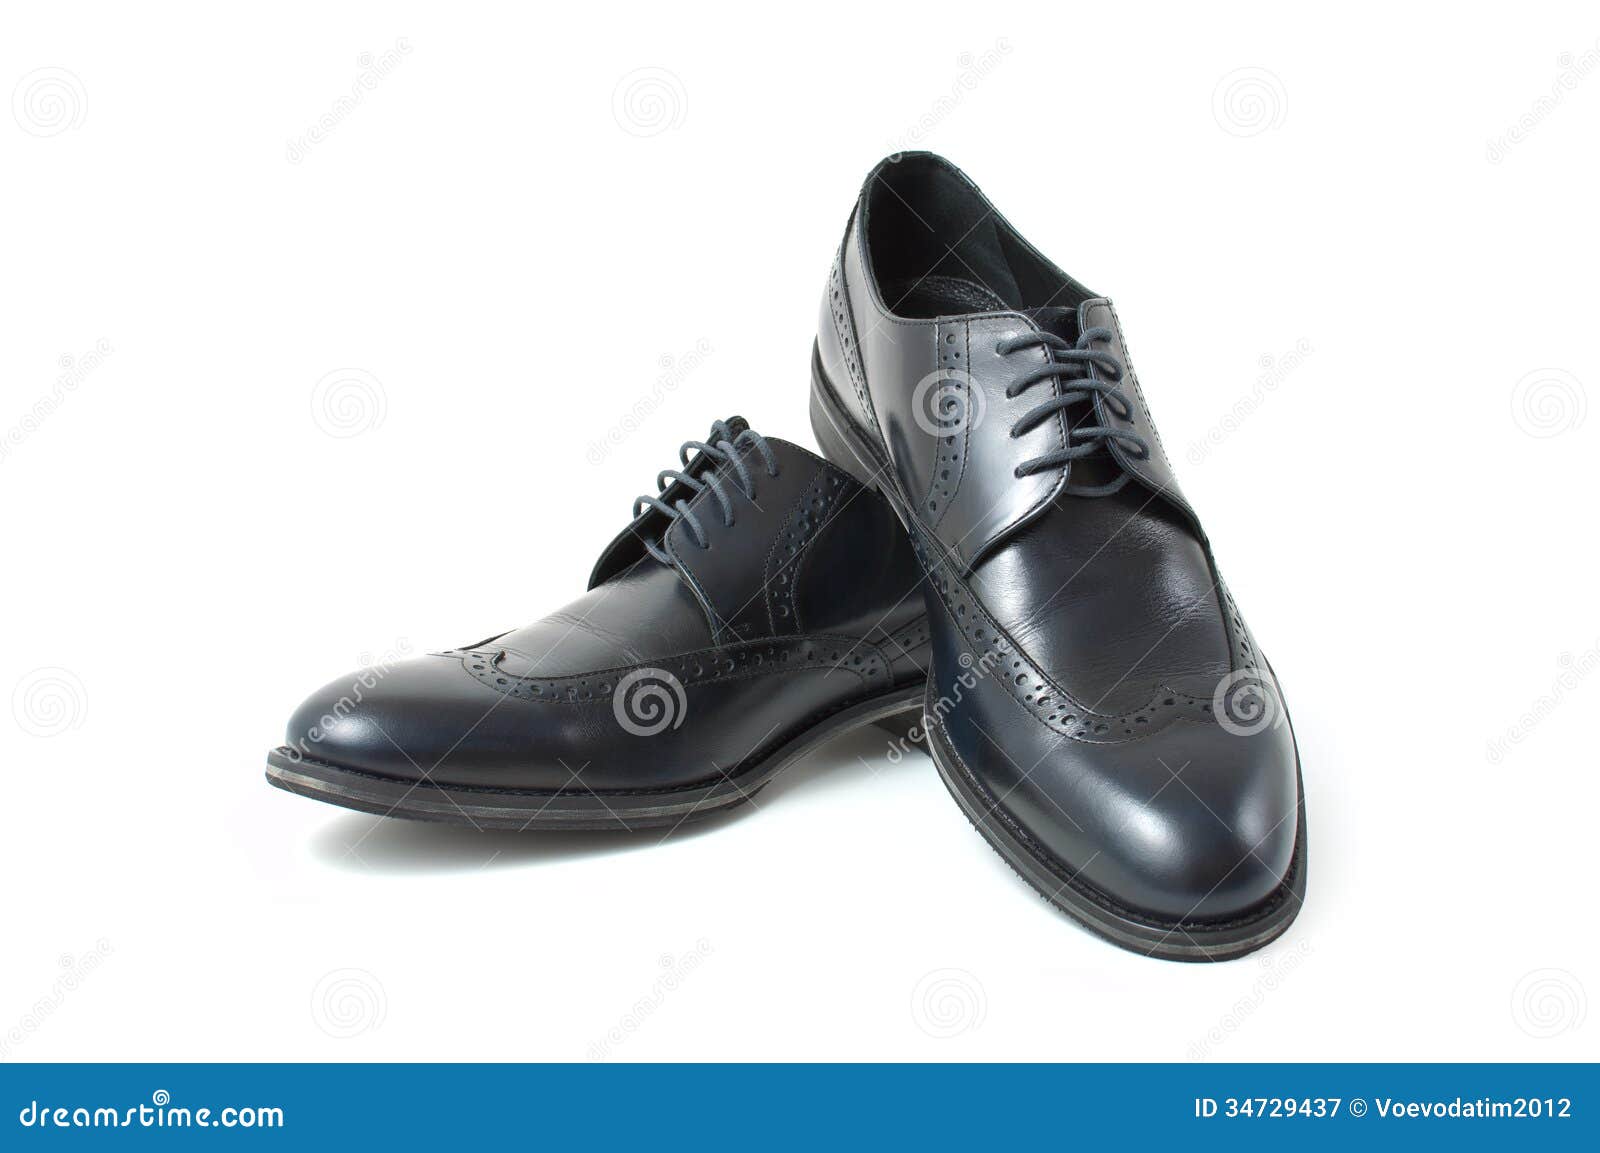 Men s classic shoes stock image. Image of classic, leather - 34729437